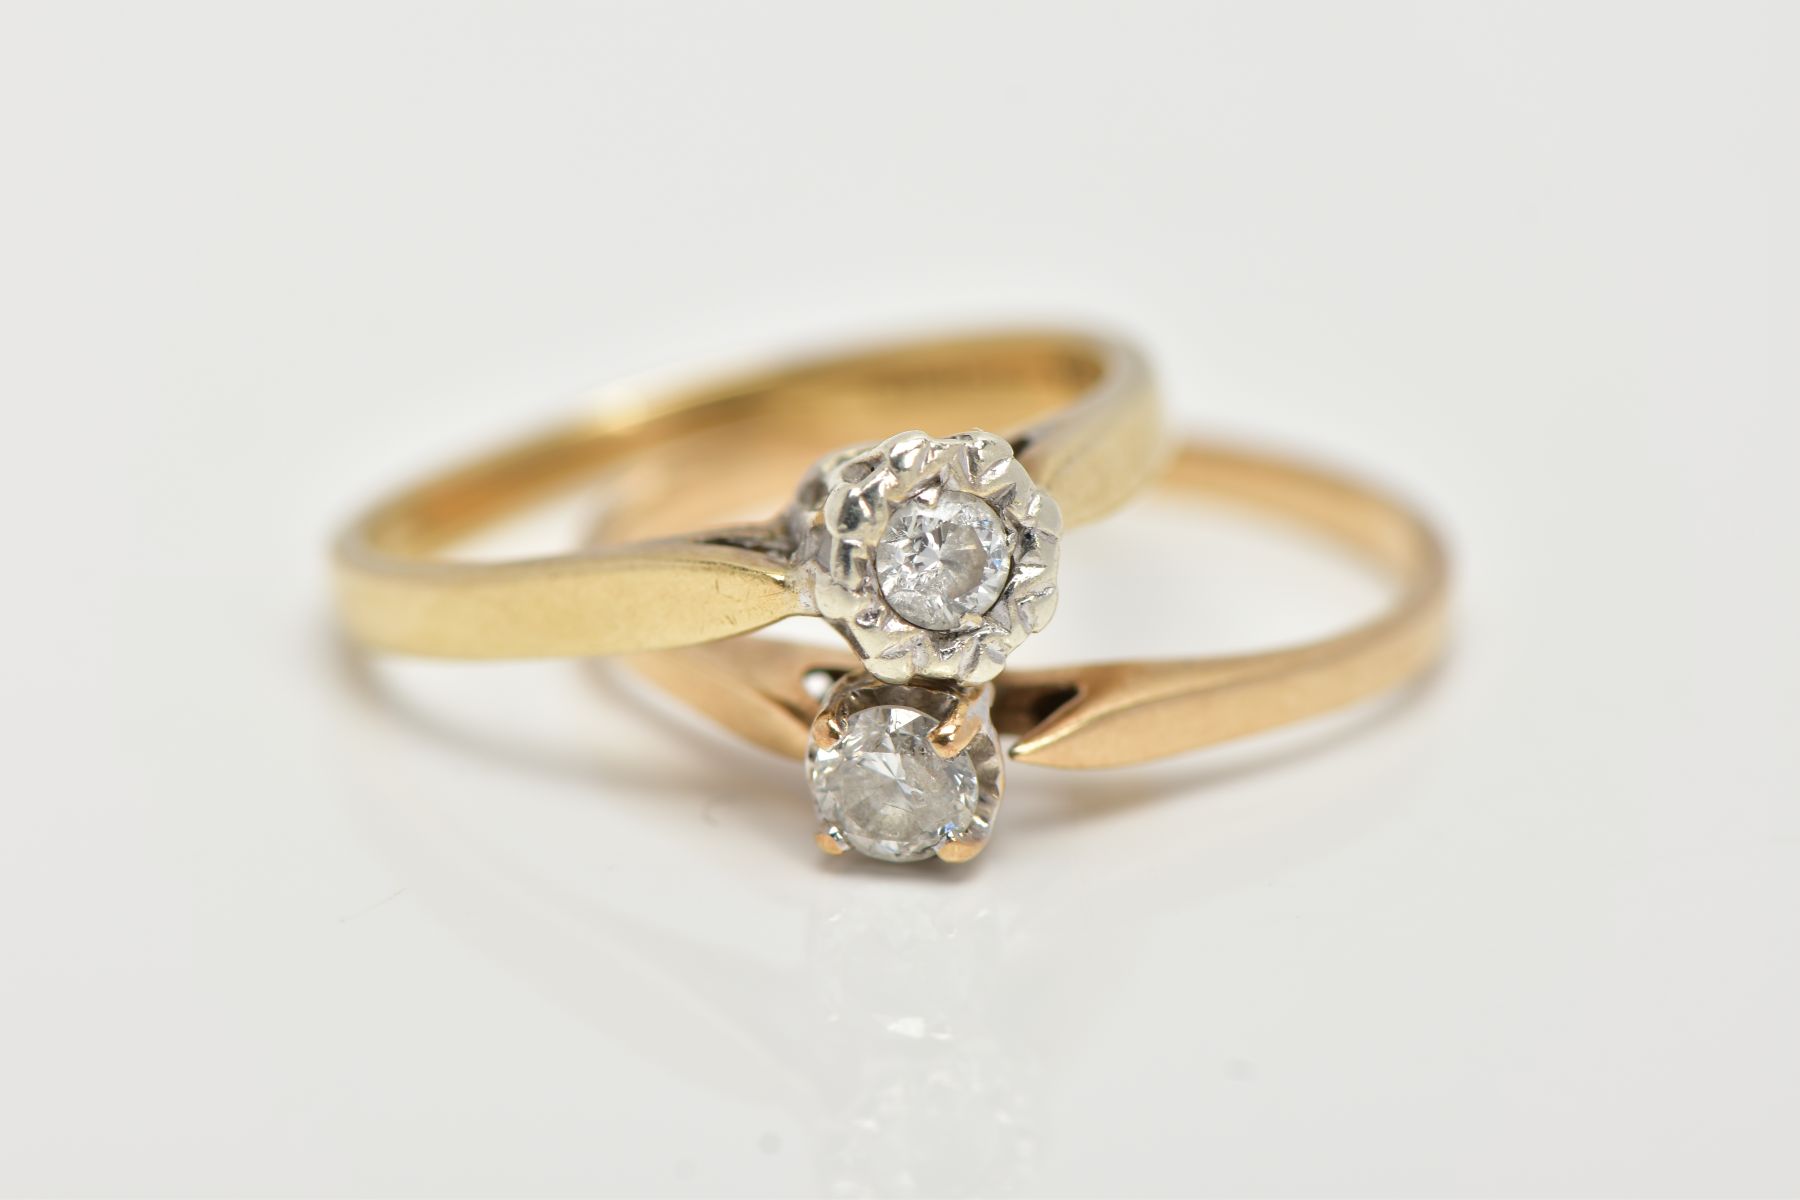 TWO SINGLE STONE DIAMOND RINGS, the first designed with an illusion set round brilliant cut diamond, - Image 4 of 4